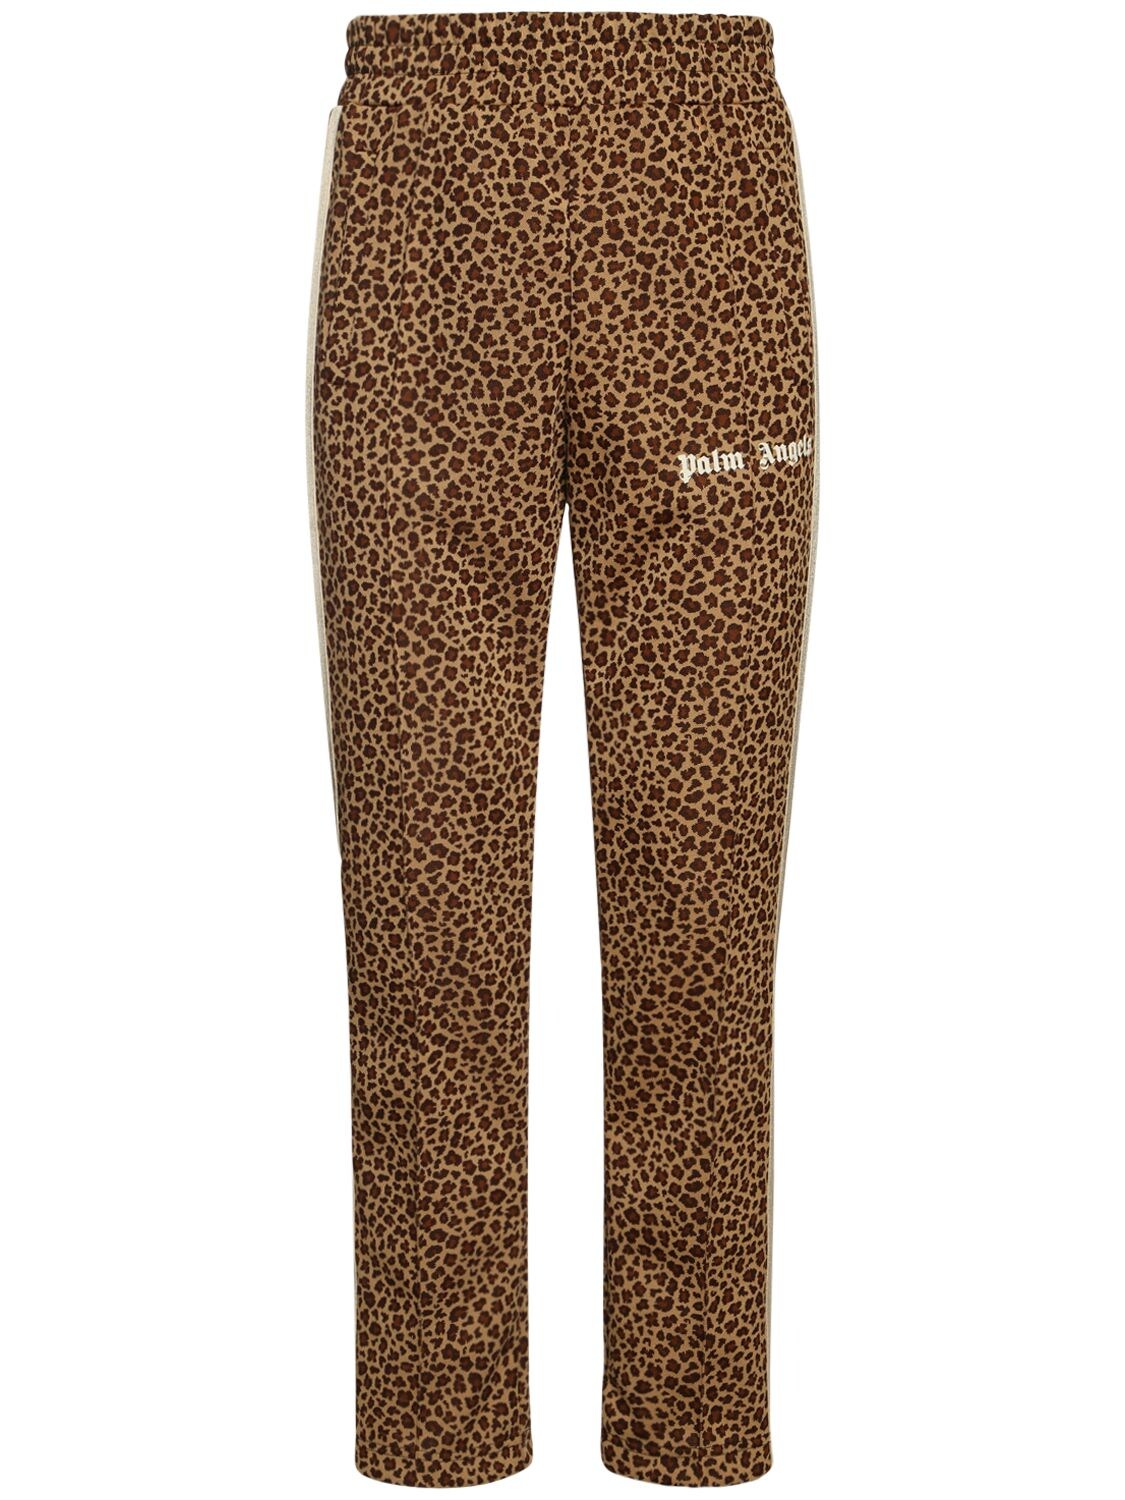 PALM ANGELS LEOPARD TECH JERSEY TRACK trousers